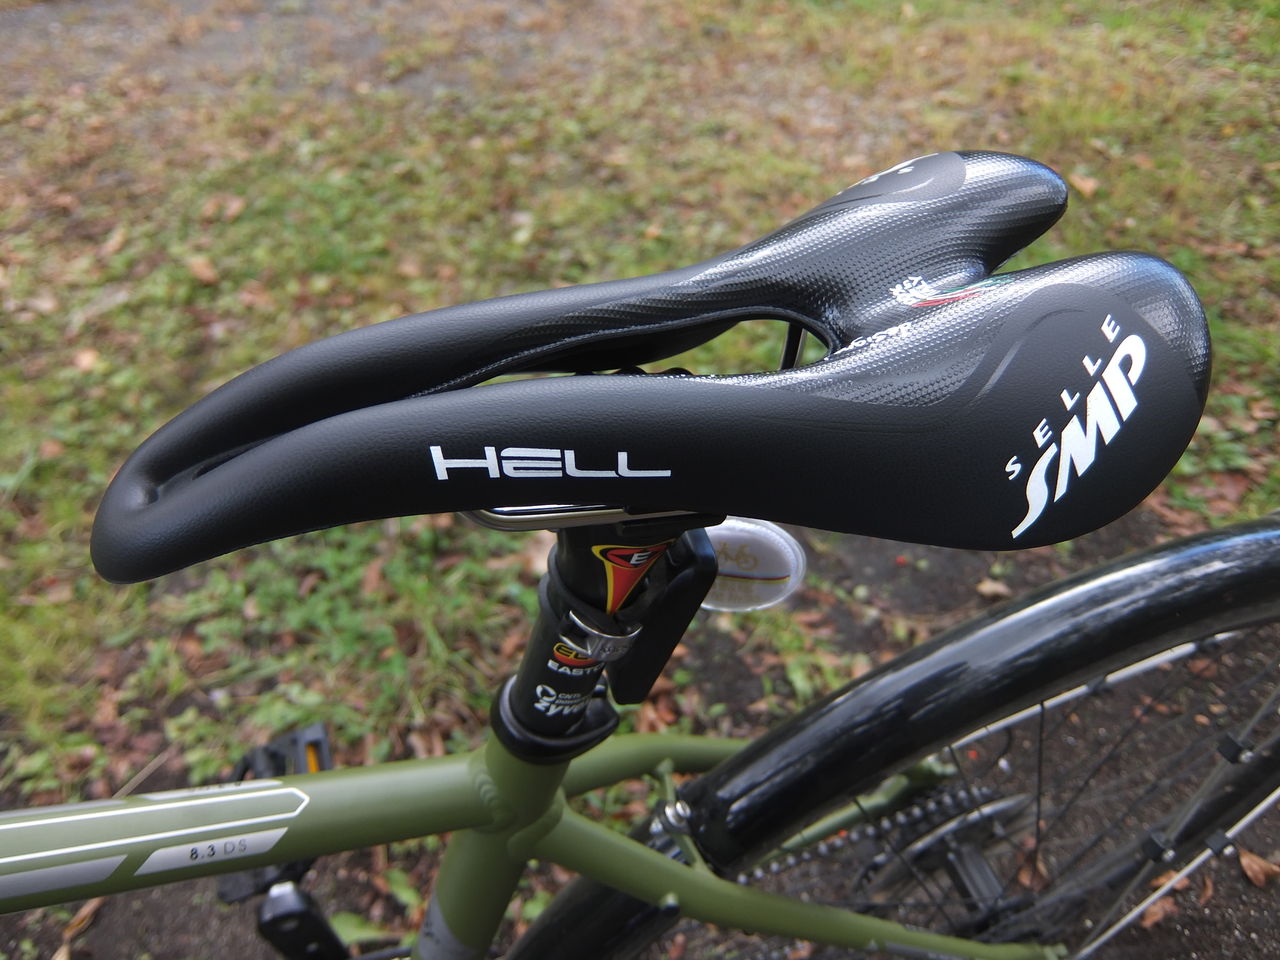 SELLE SMP HELL セラSMPヘルサドル - パーツ